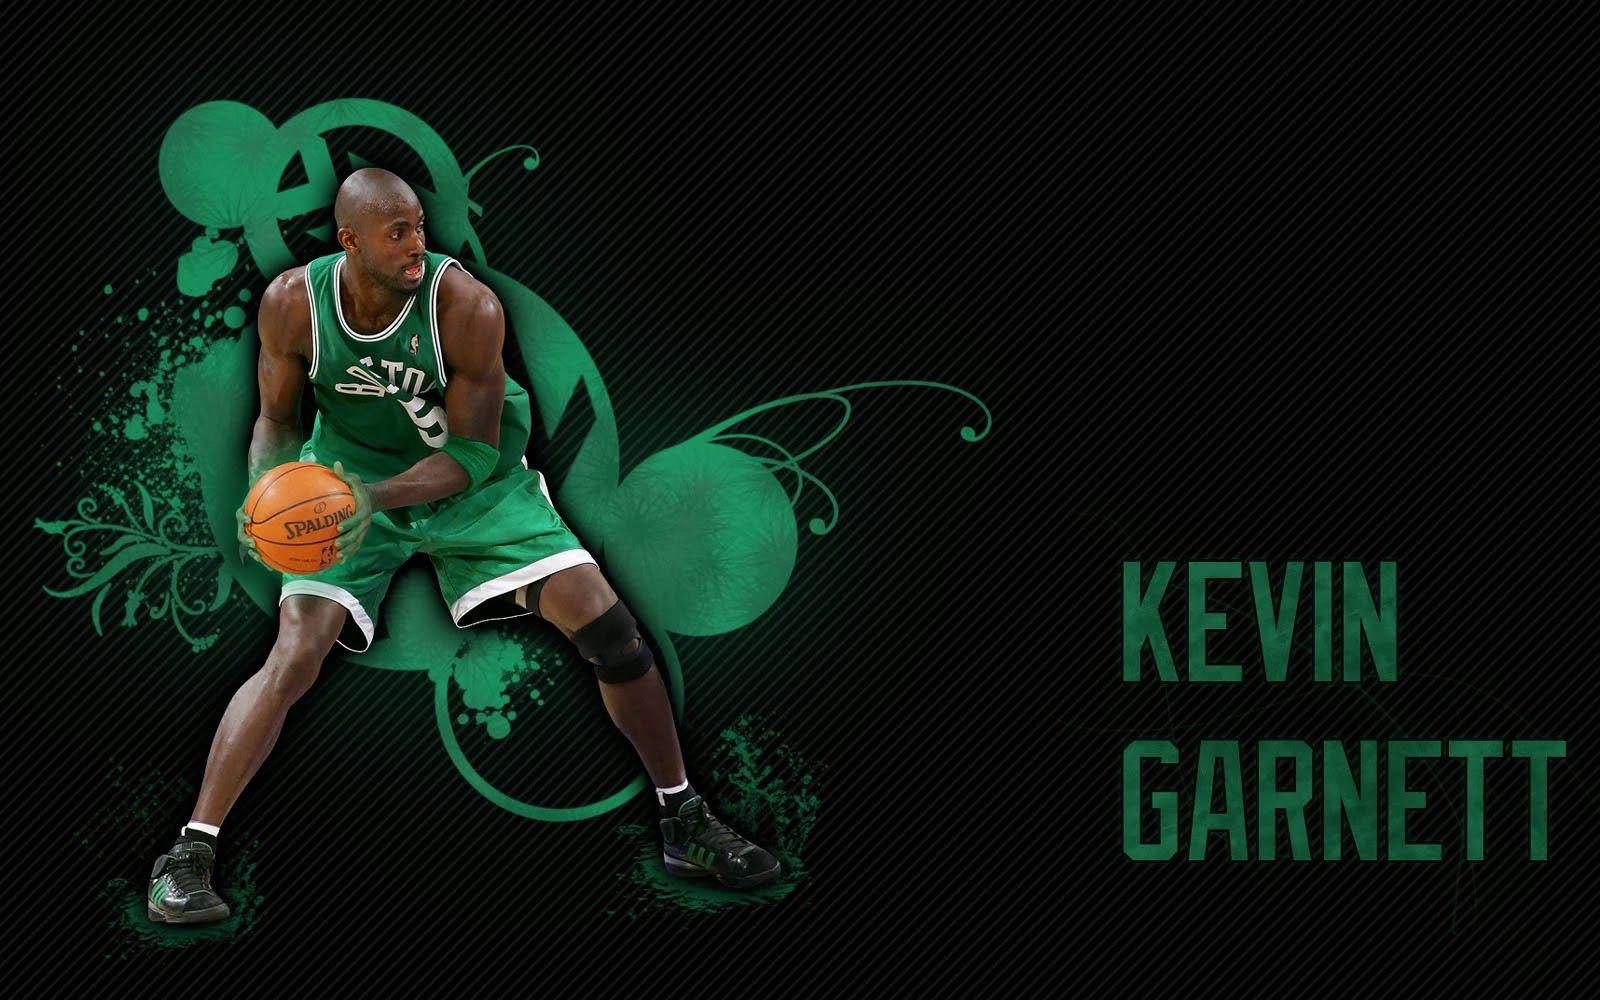 Kevin Garnett Cars Picture to